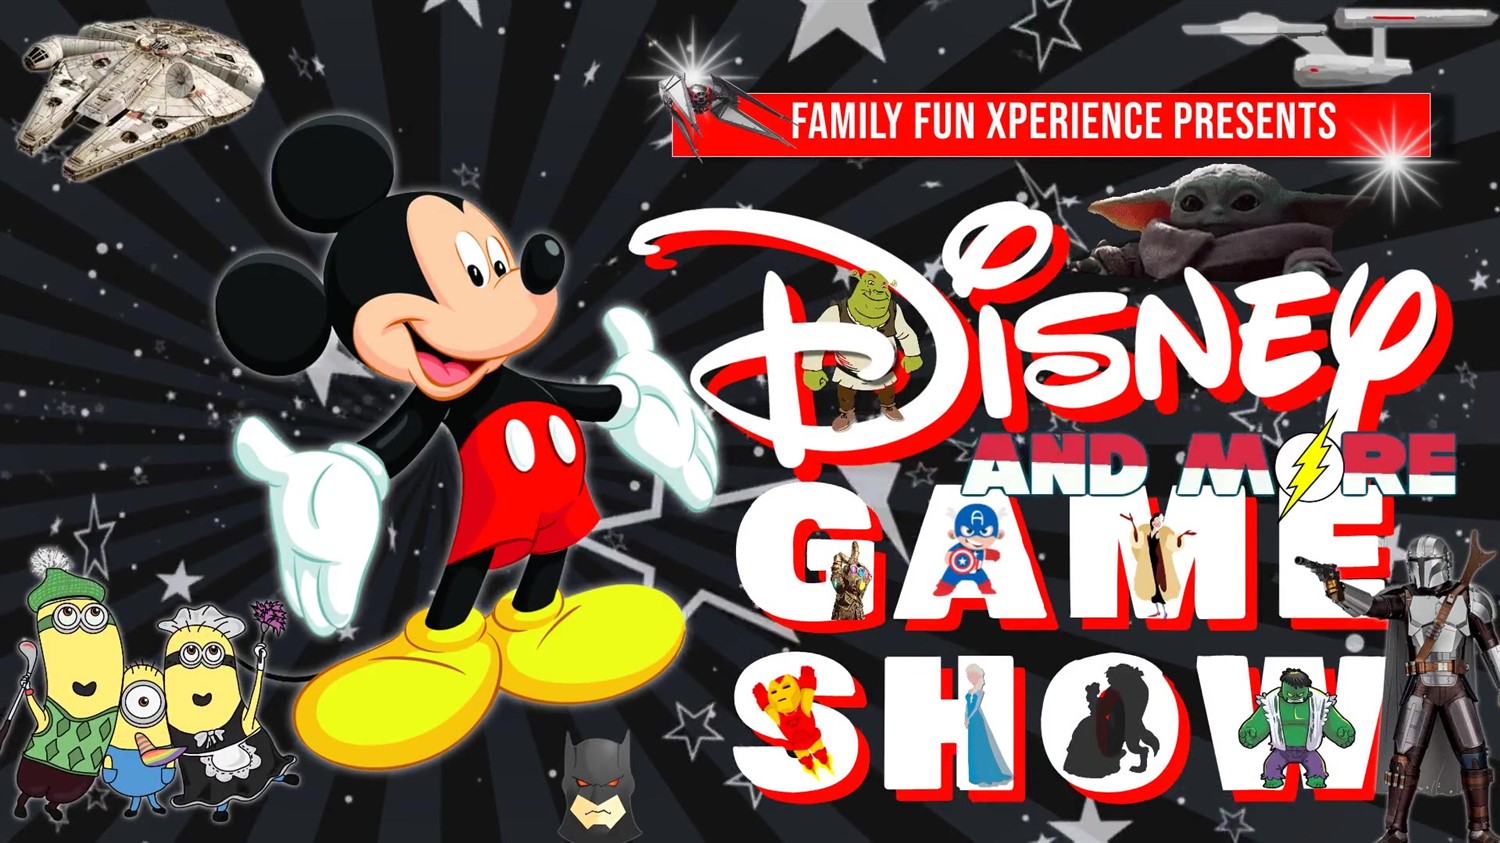 DISNEY & MORE GAME SHOW Animation, movies, sci-fi, superheroes, & much more! on Feb 10, 19:00@FFX Theatre - Pick a seat, Buy tickets and Get information on Family Fun Xperience tickets.ffxshow.org